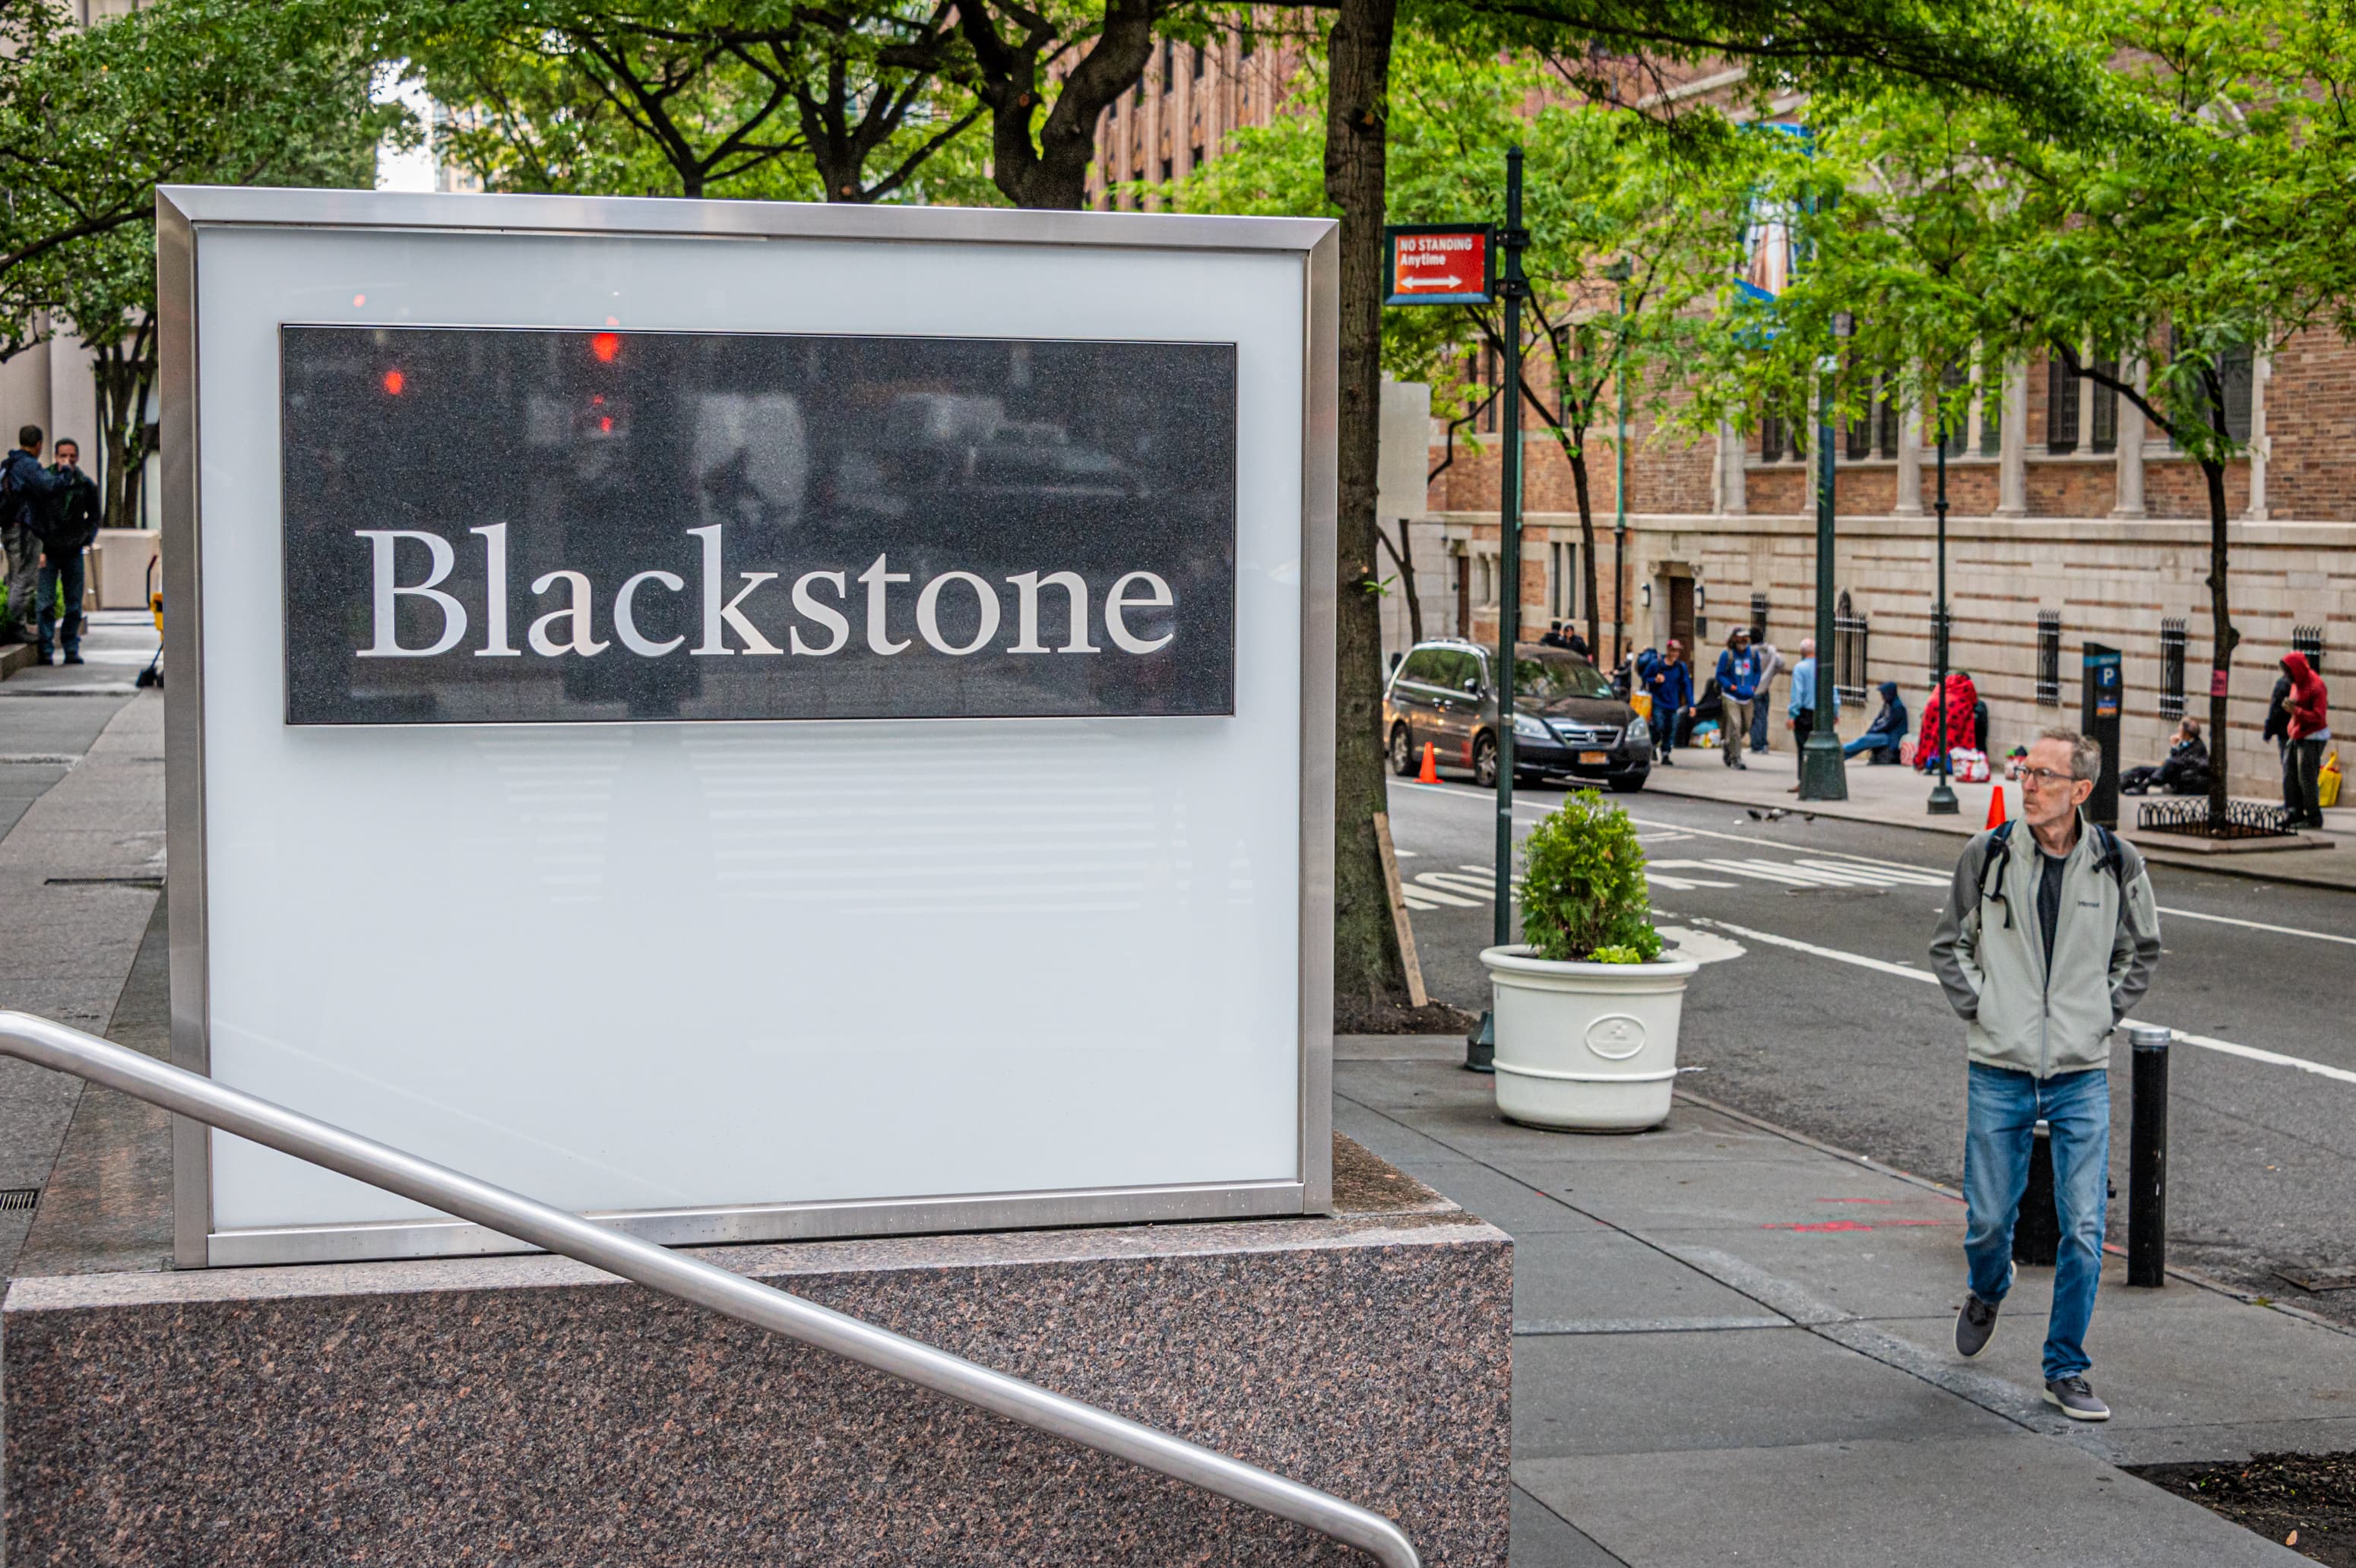 Barclays downgrades Blackstone shares after firm limits withdrawals from real estate fund